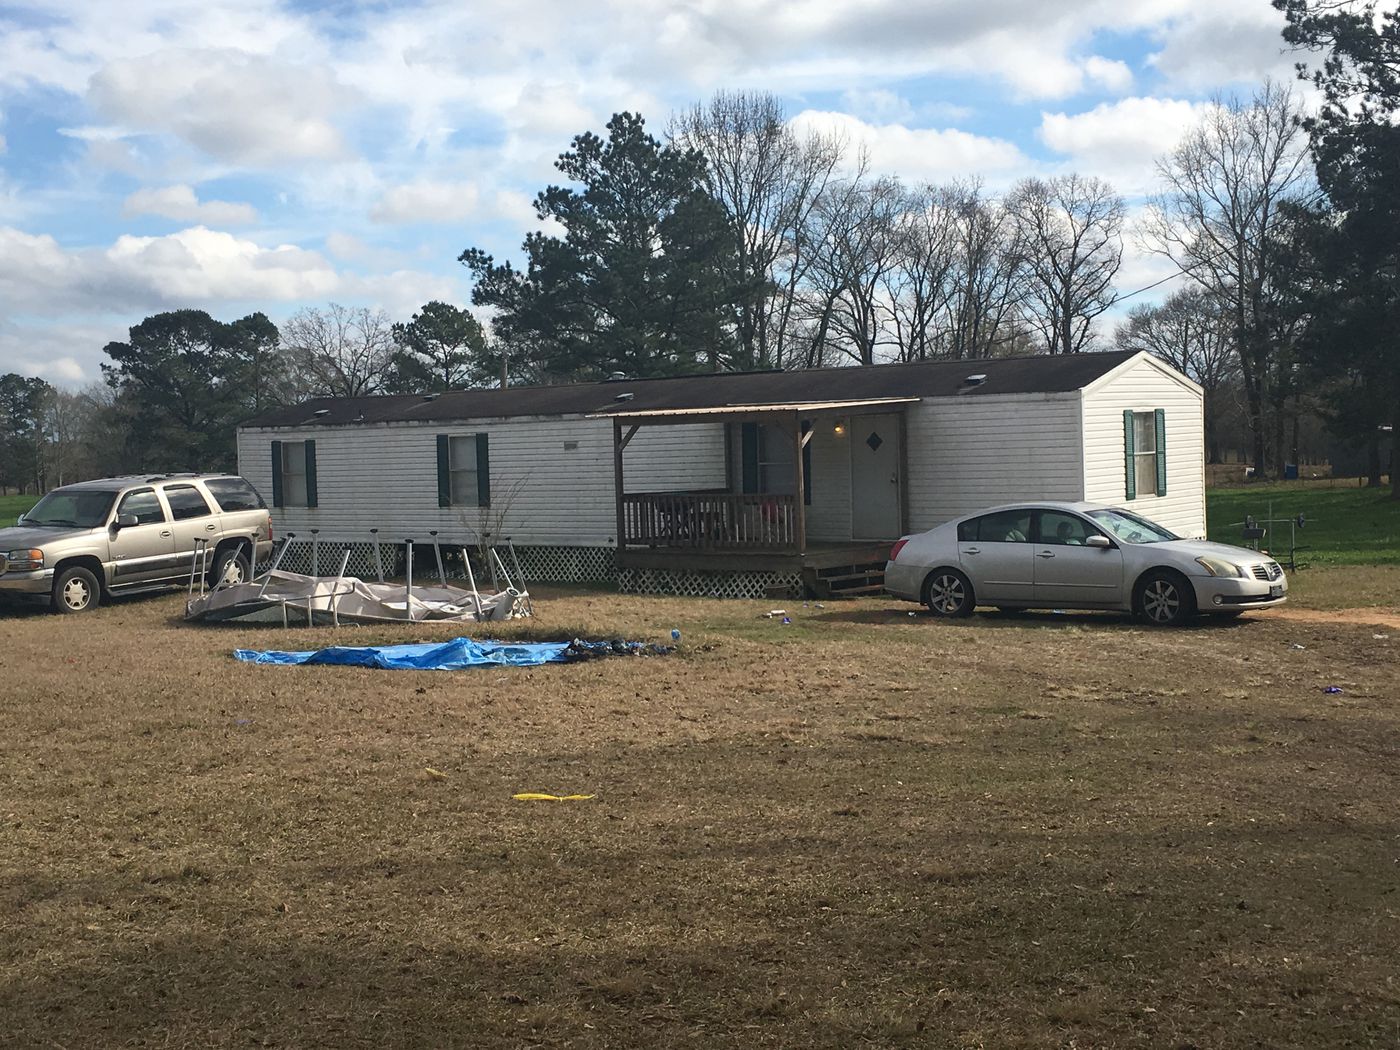 Pike County deputies were called to the home of 32-year-old Erica Hall on a disturbance call before she was murdered. Source: WLBT